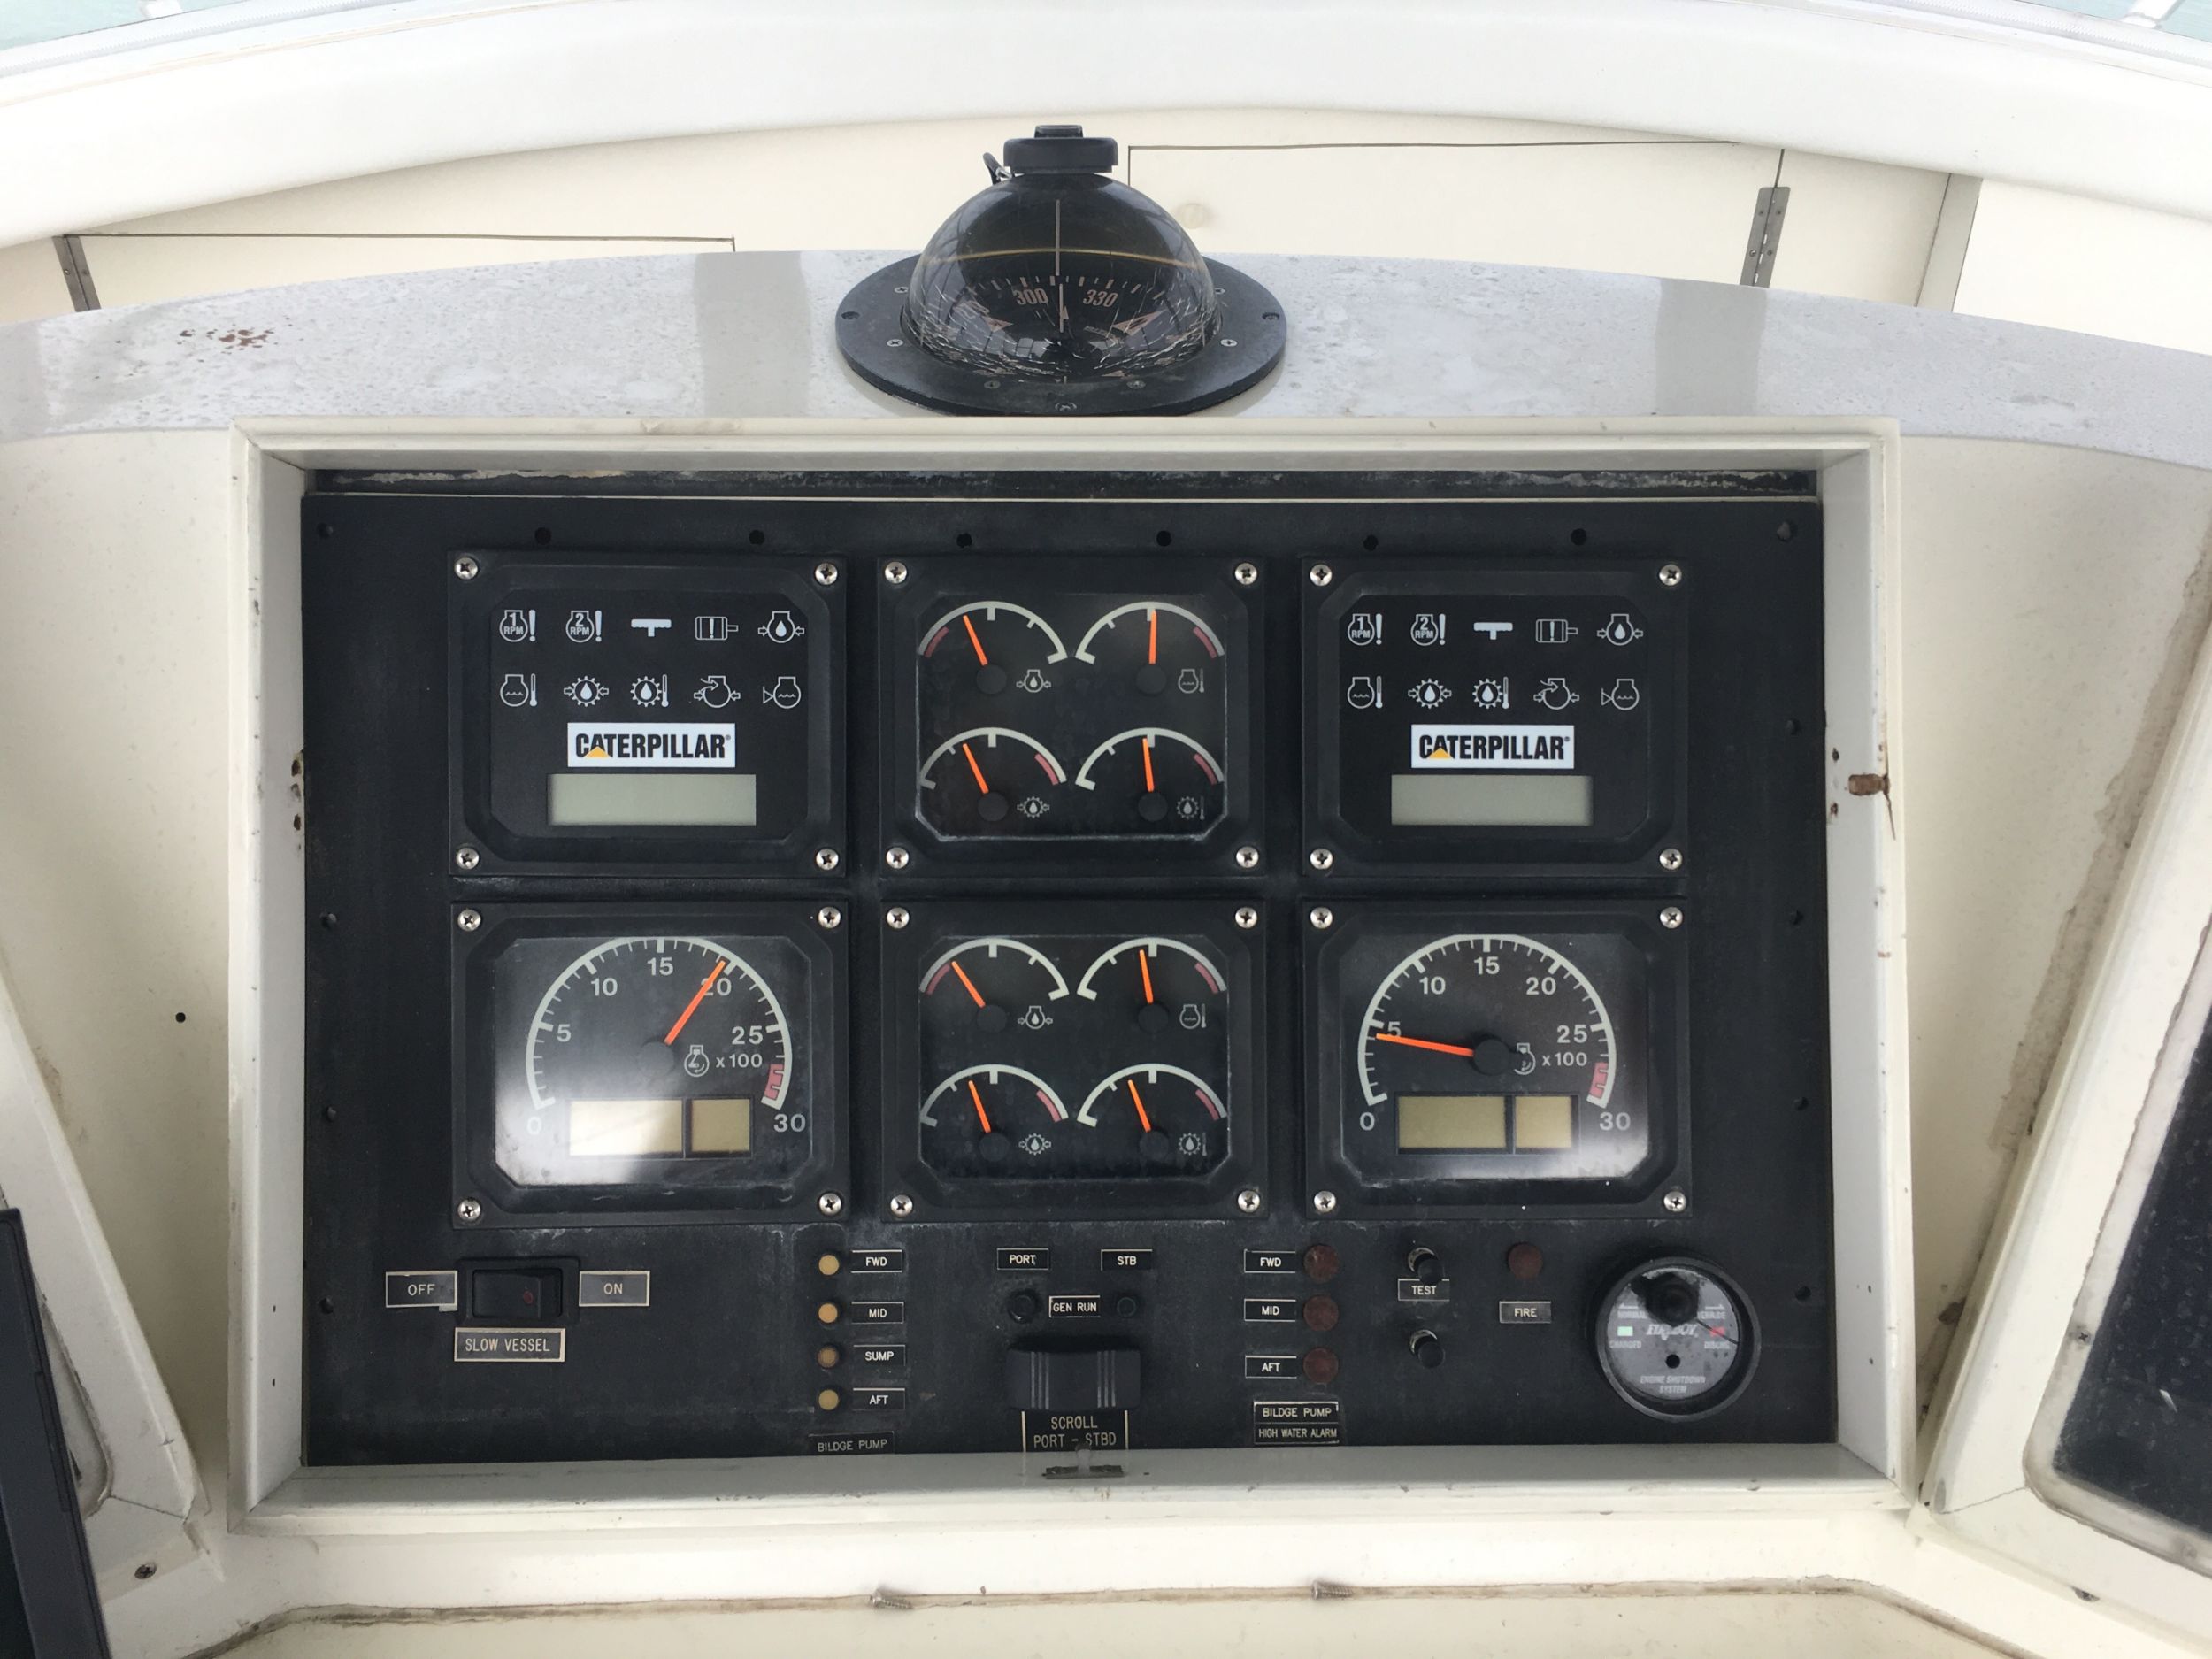 “The engines continue to provide excellent service after all these years, but the displays needed updating. This was a way to put new technology into an older vessel to help extend its life and usefulness.” 